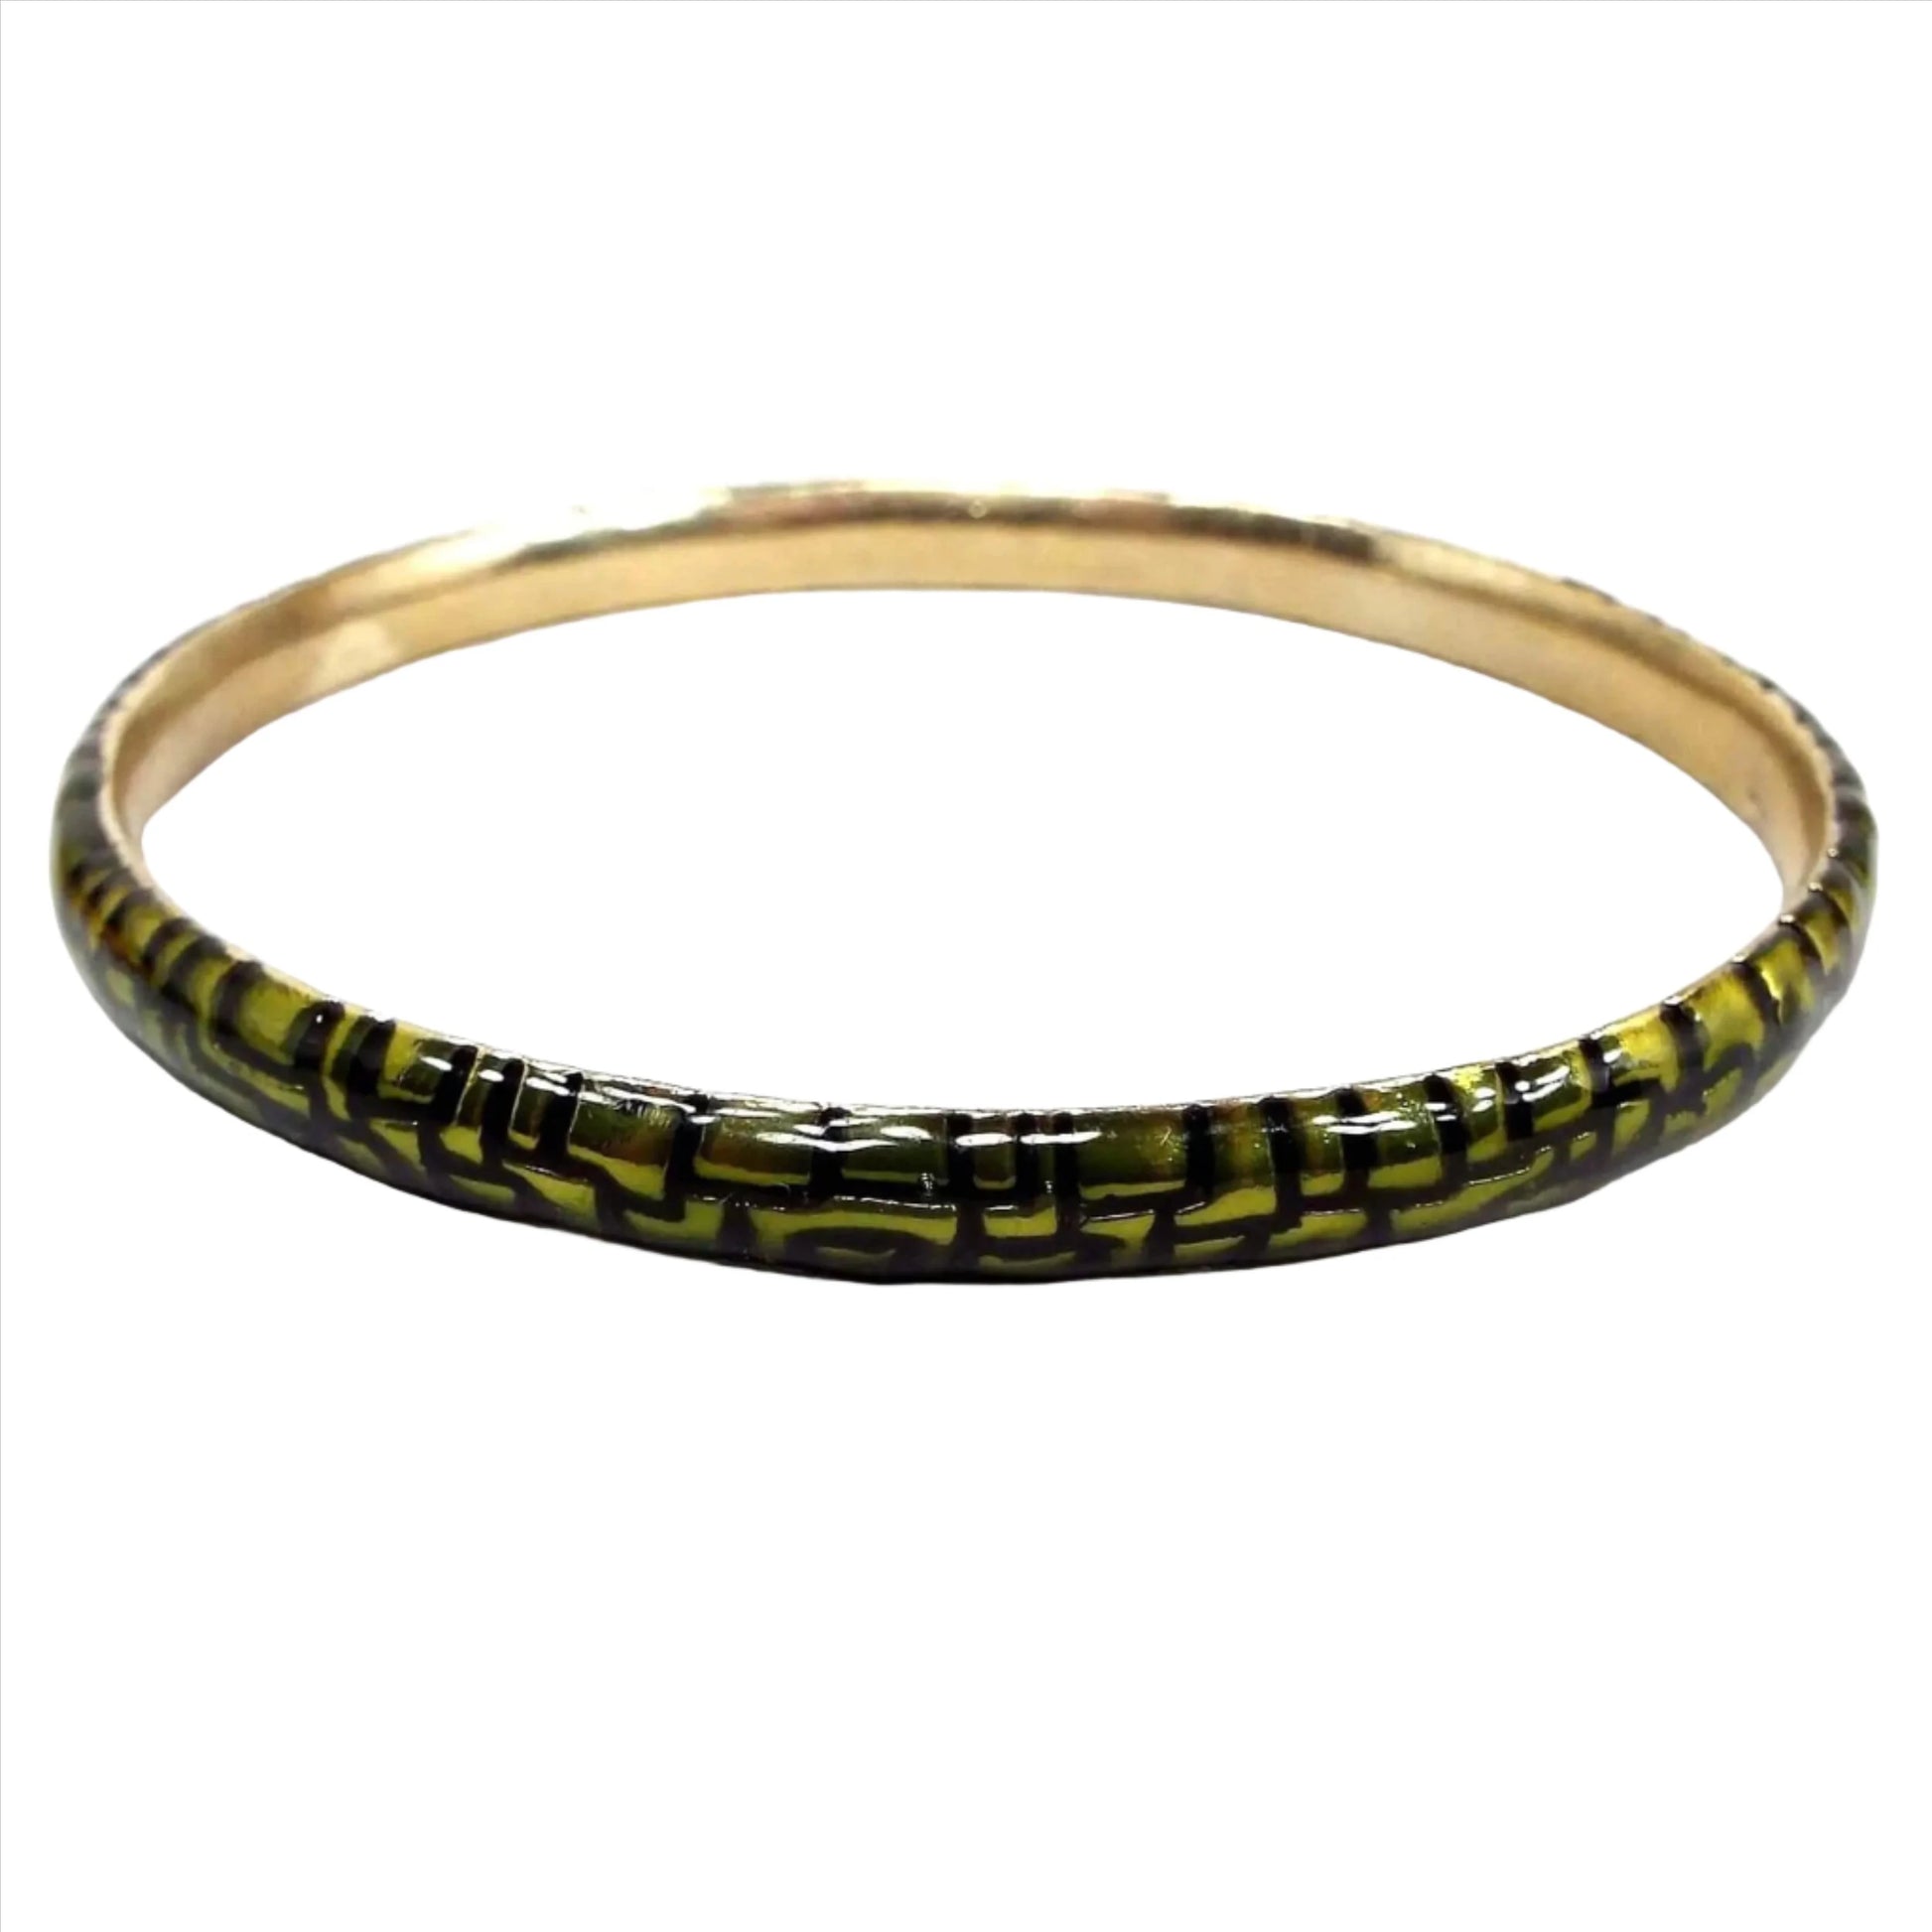 Angled side view of the retro vintage Monet bangle bracelet. The outside edge is enameled green with an angled scale like pattern. The inside of the bangle is gold tone in color.